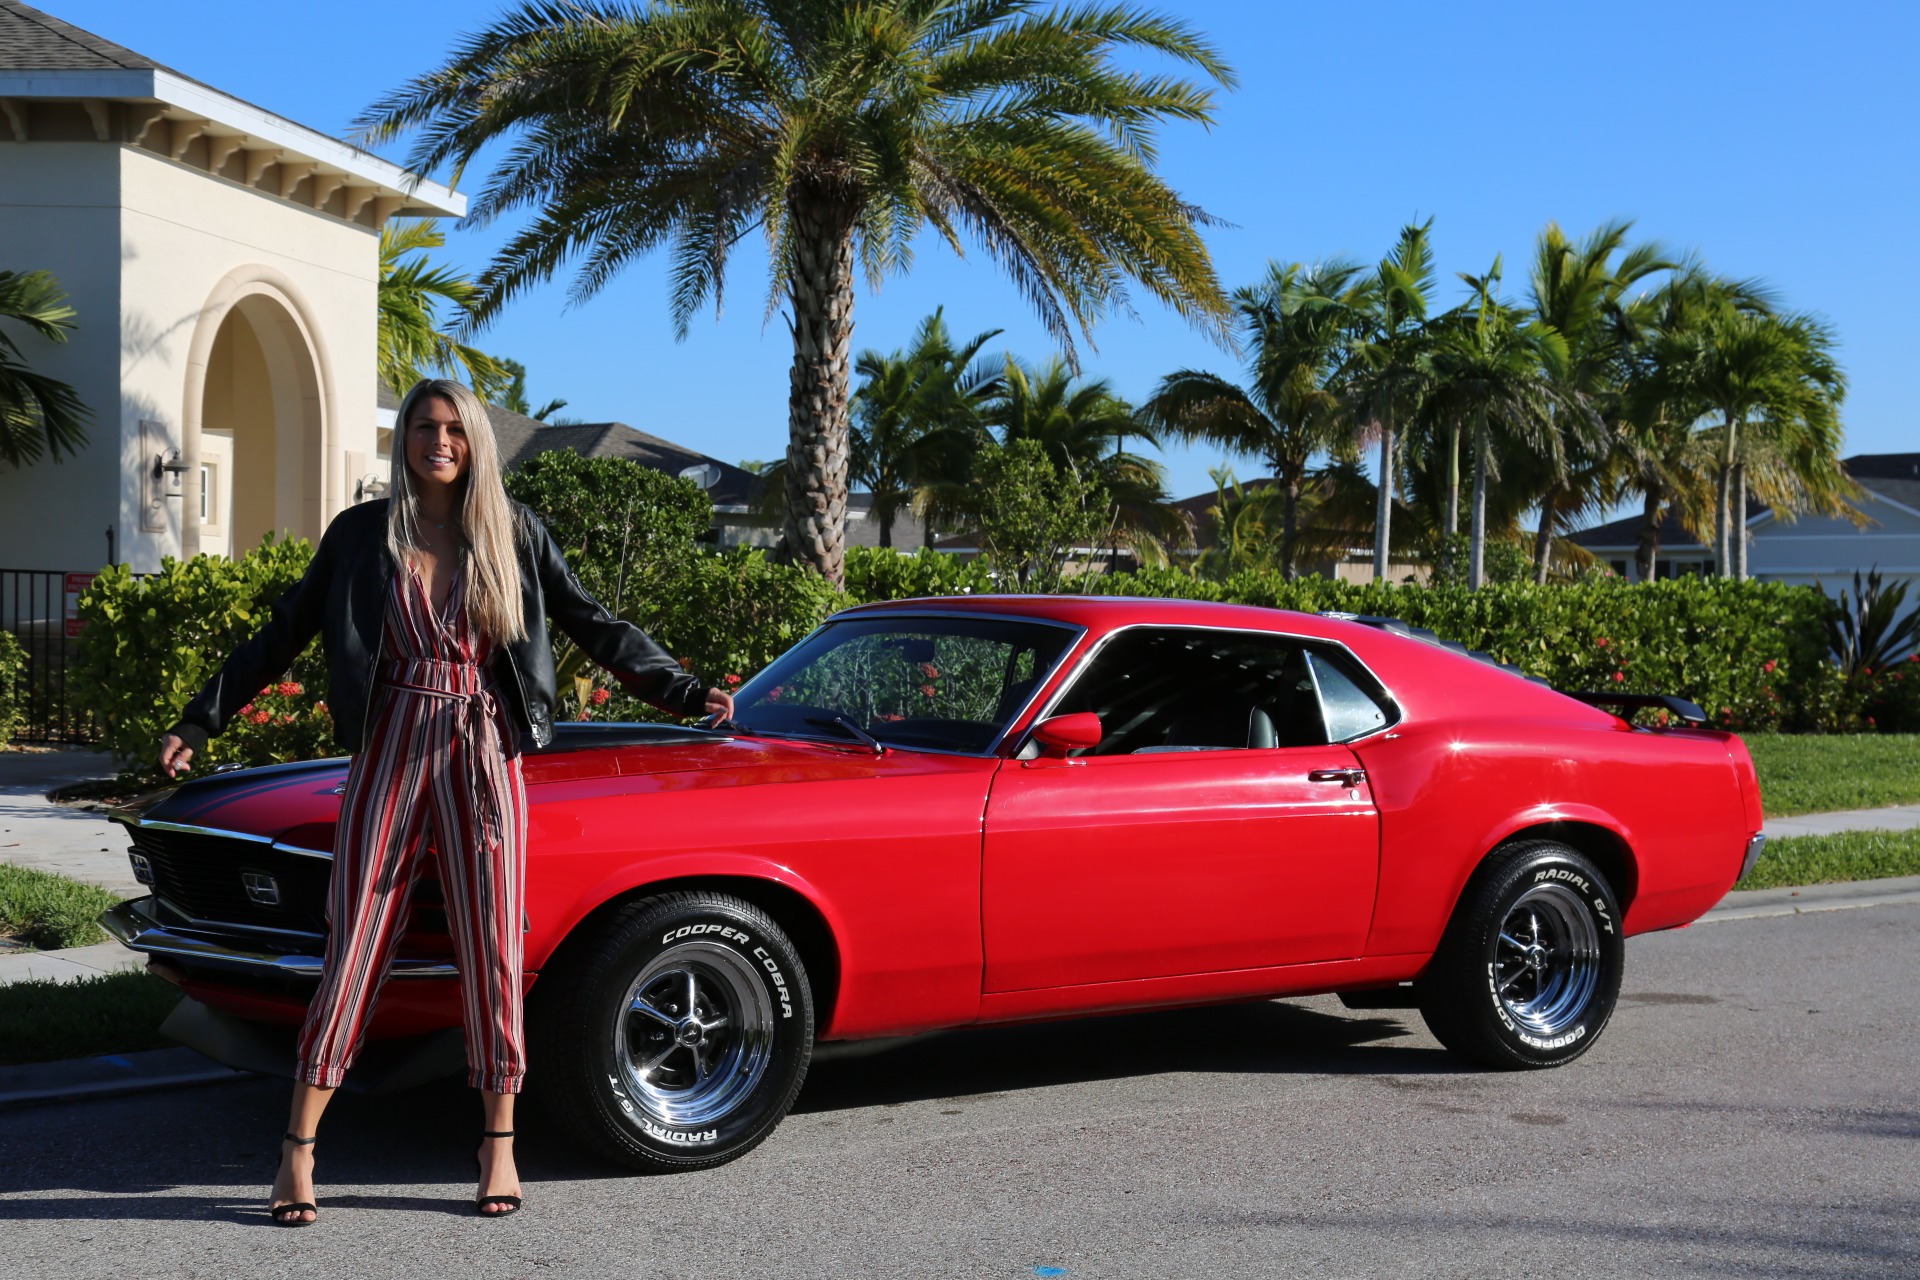 Used 1970 Ford Mustang Mach I for sale Sold at Muscle Cars for Sale Inc. in Fort Myers FL 33912 2